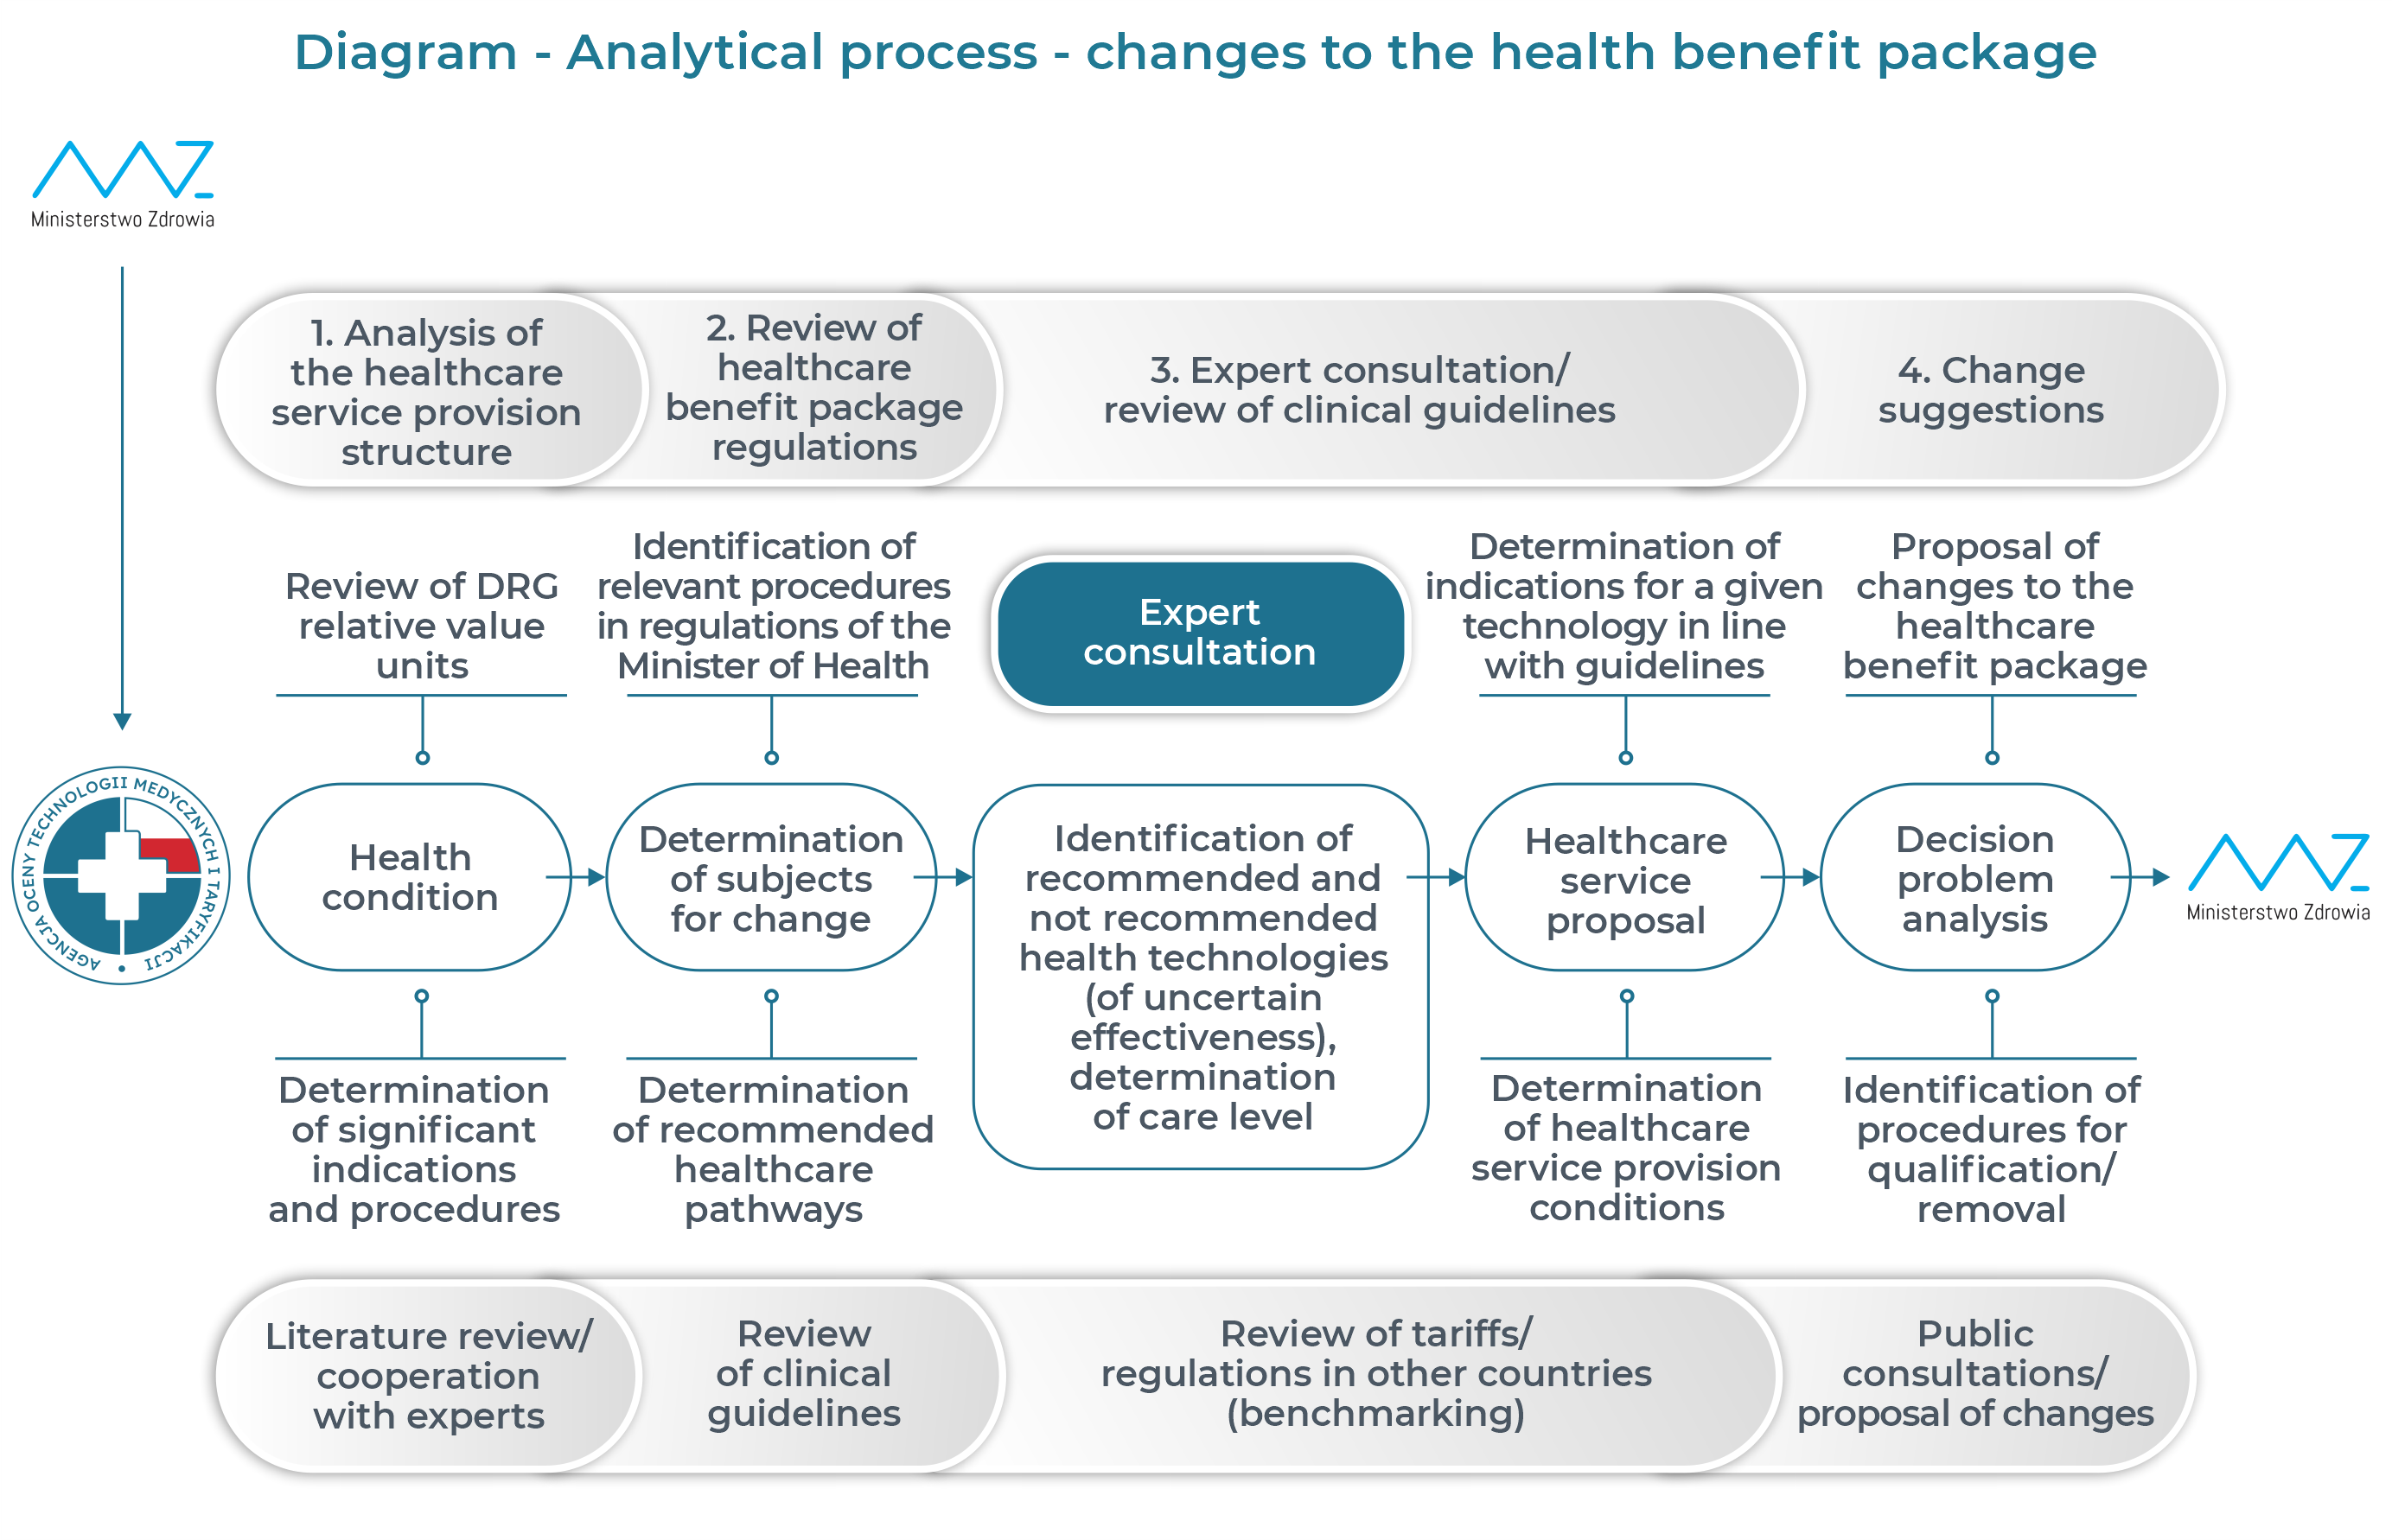 Diagram - Analytical process - changes to the health benefit package